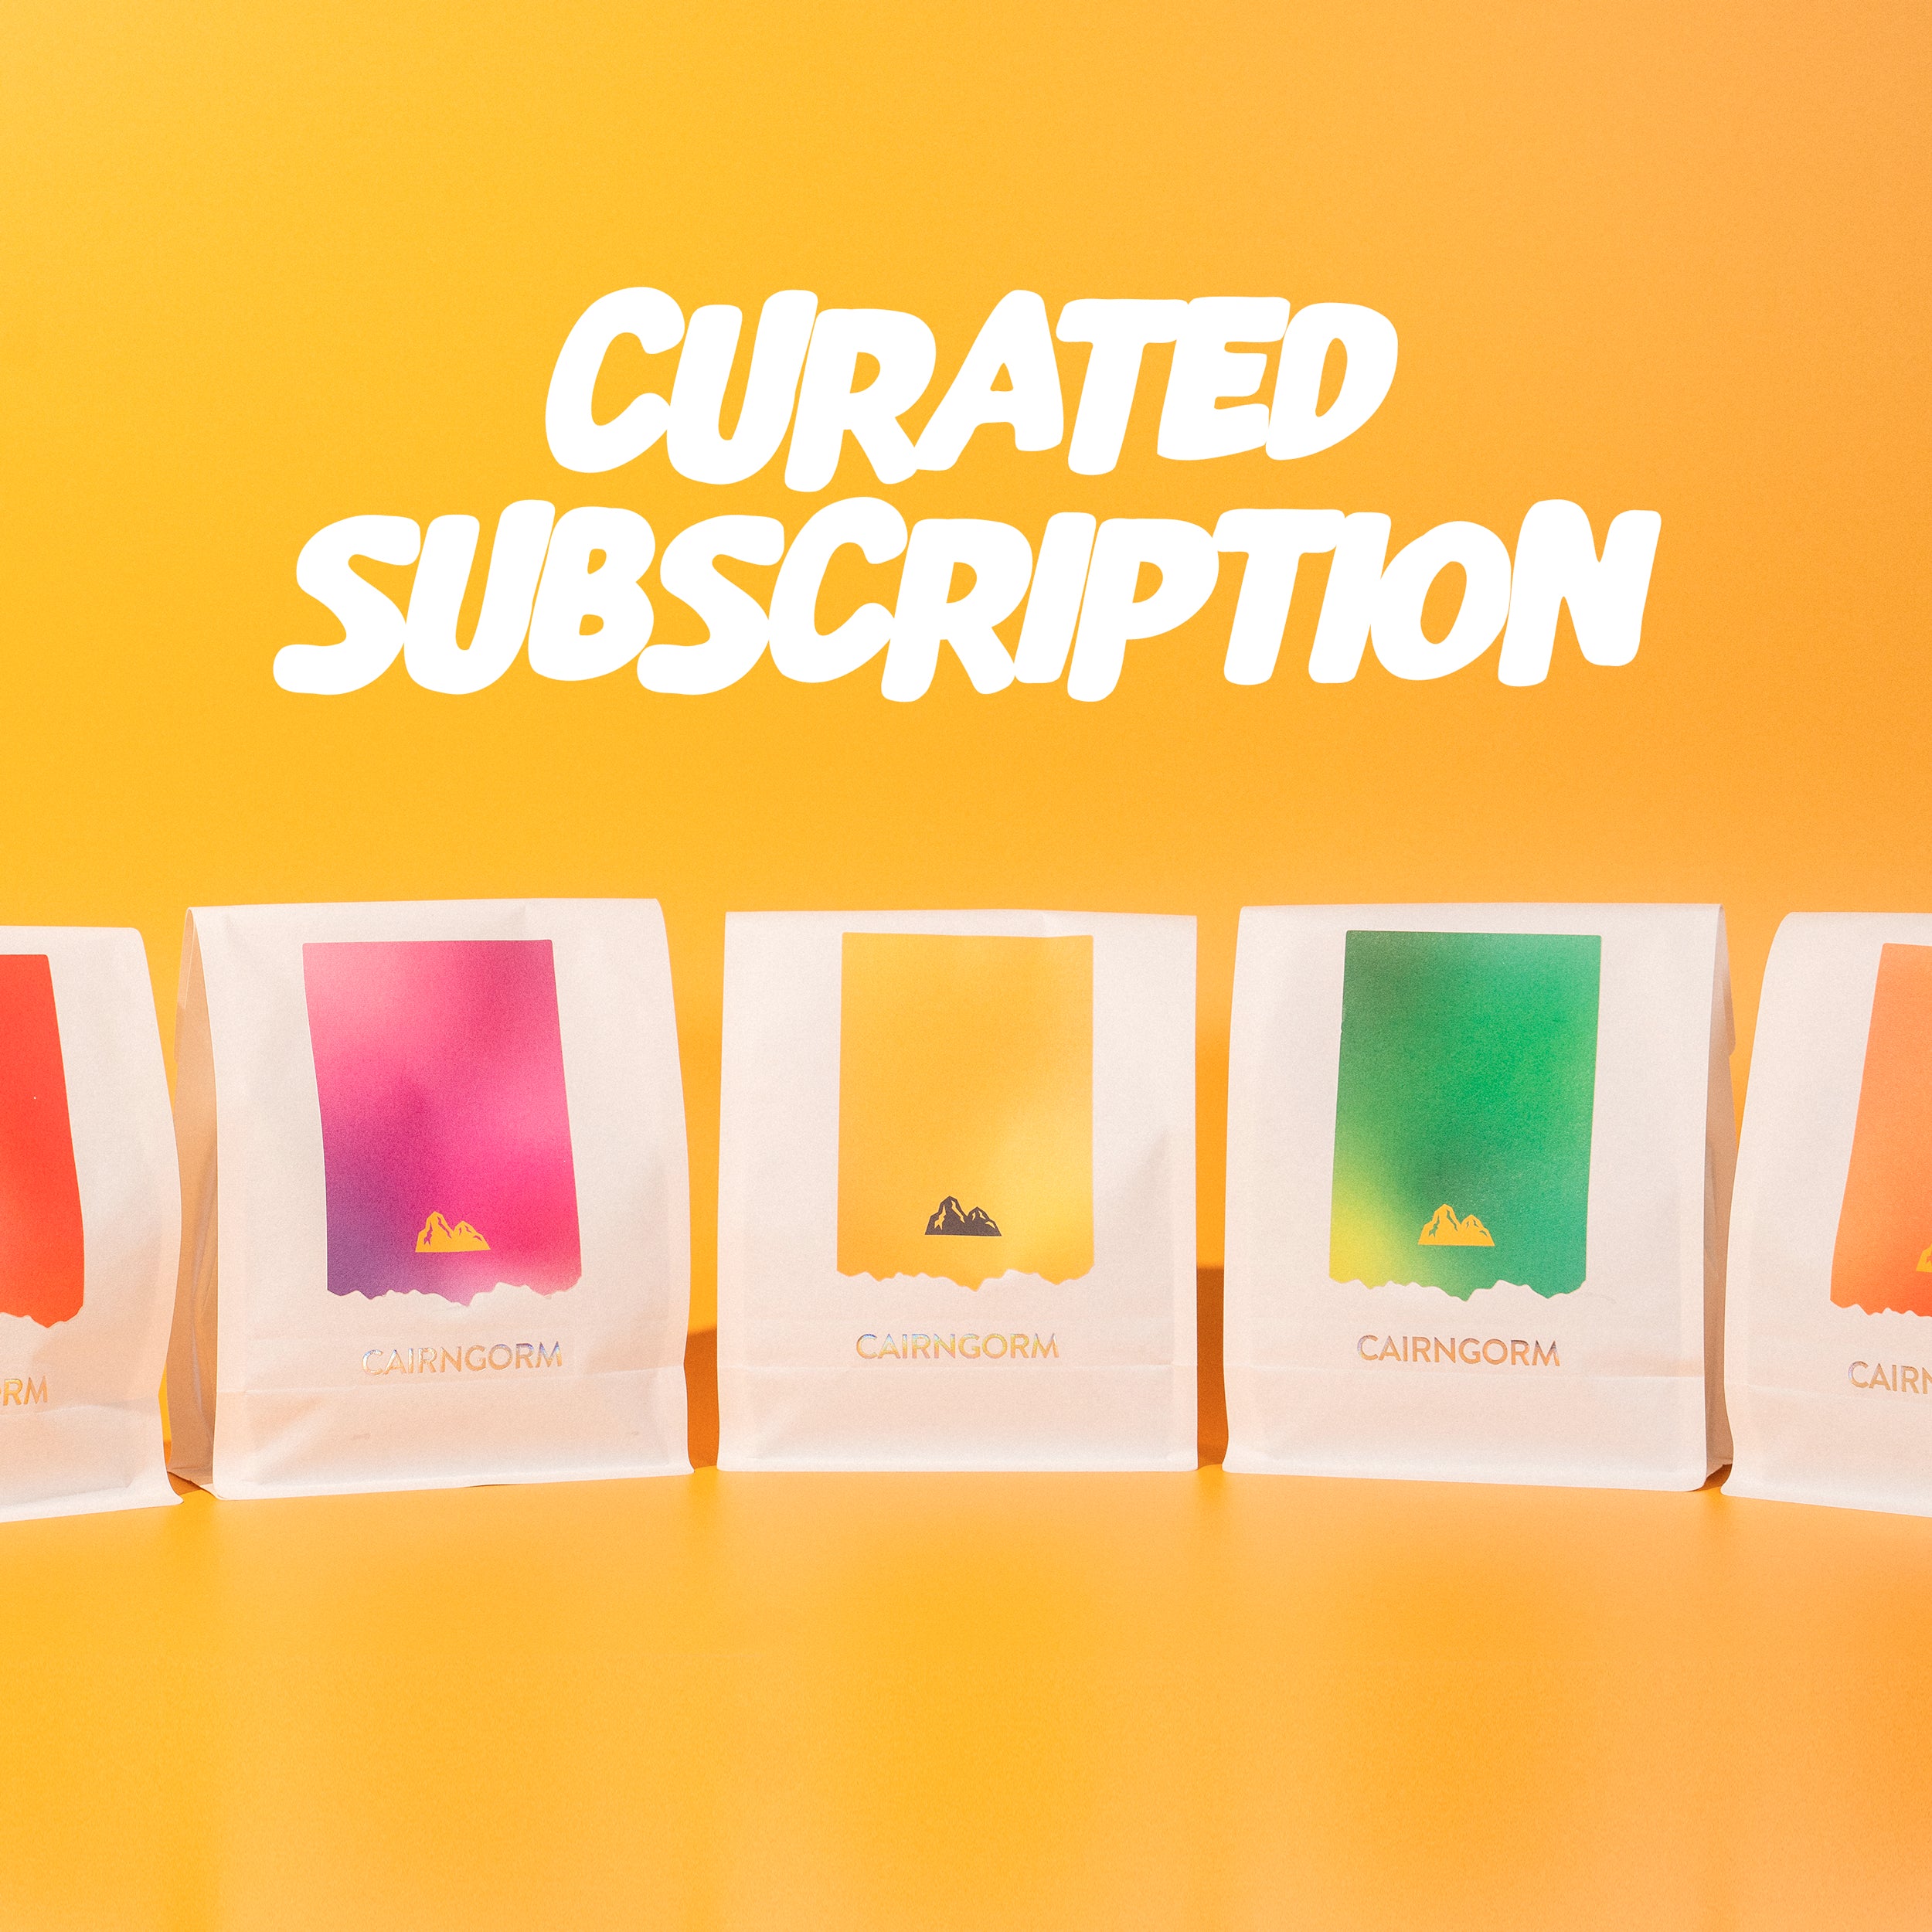 Curated Subscription